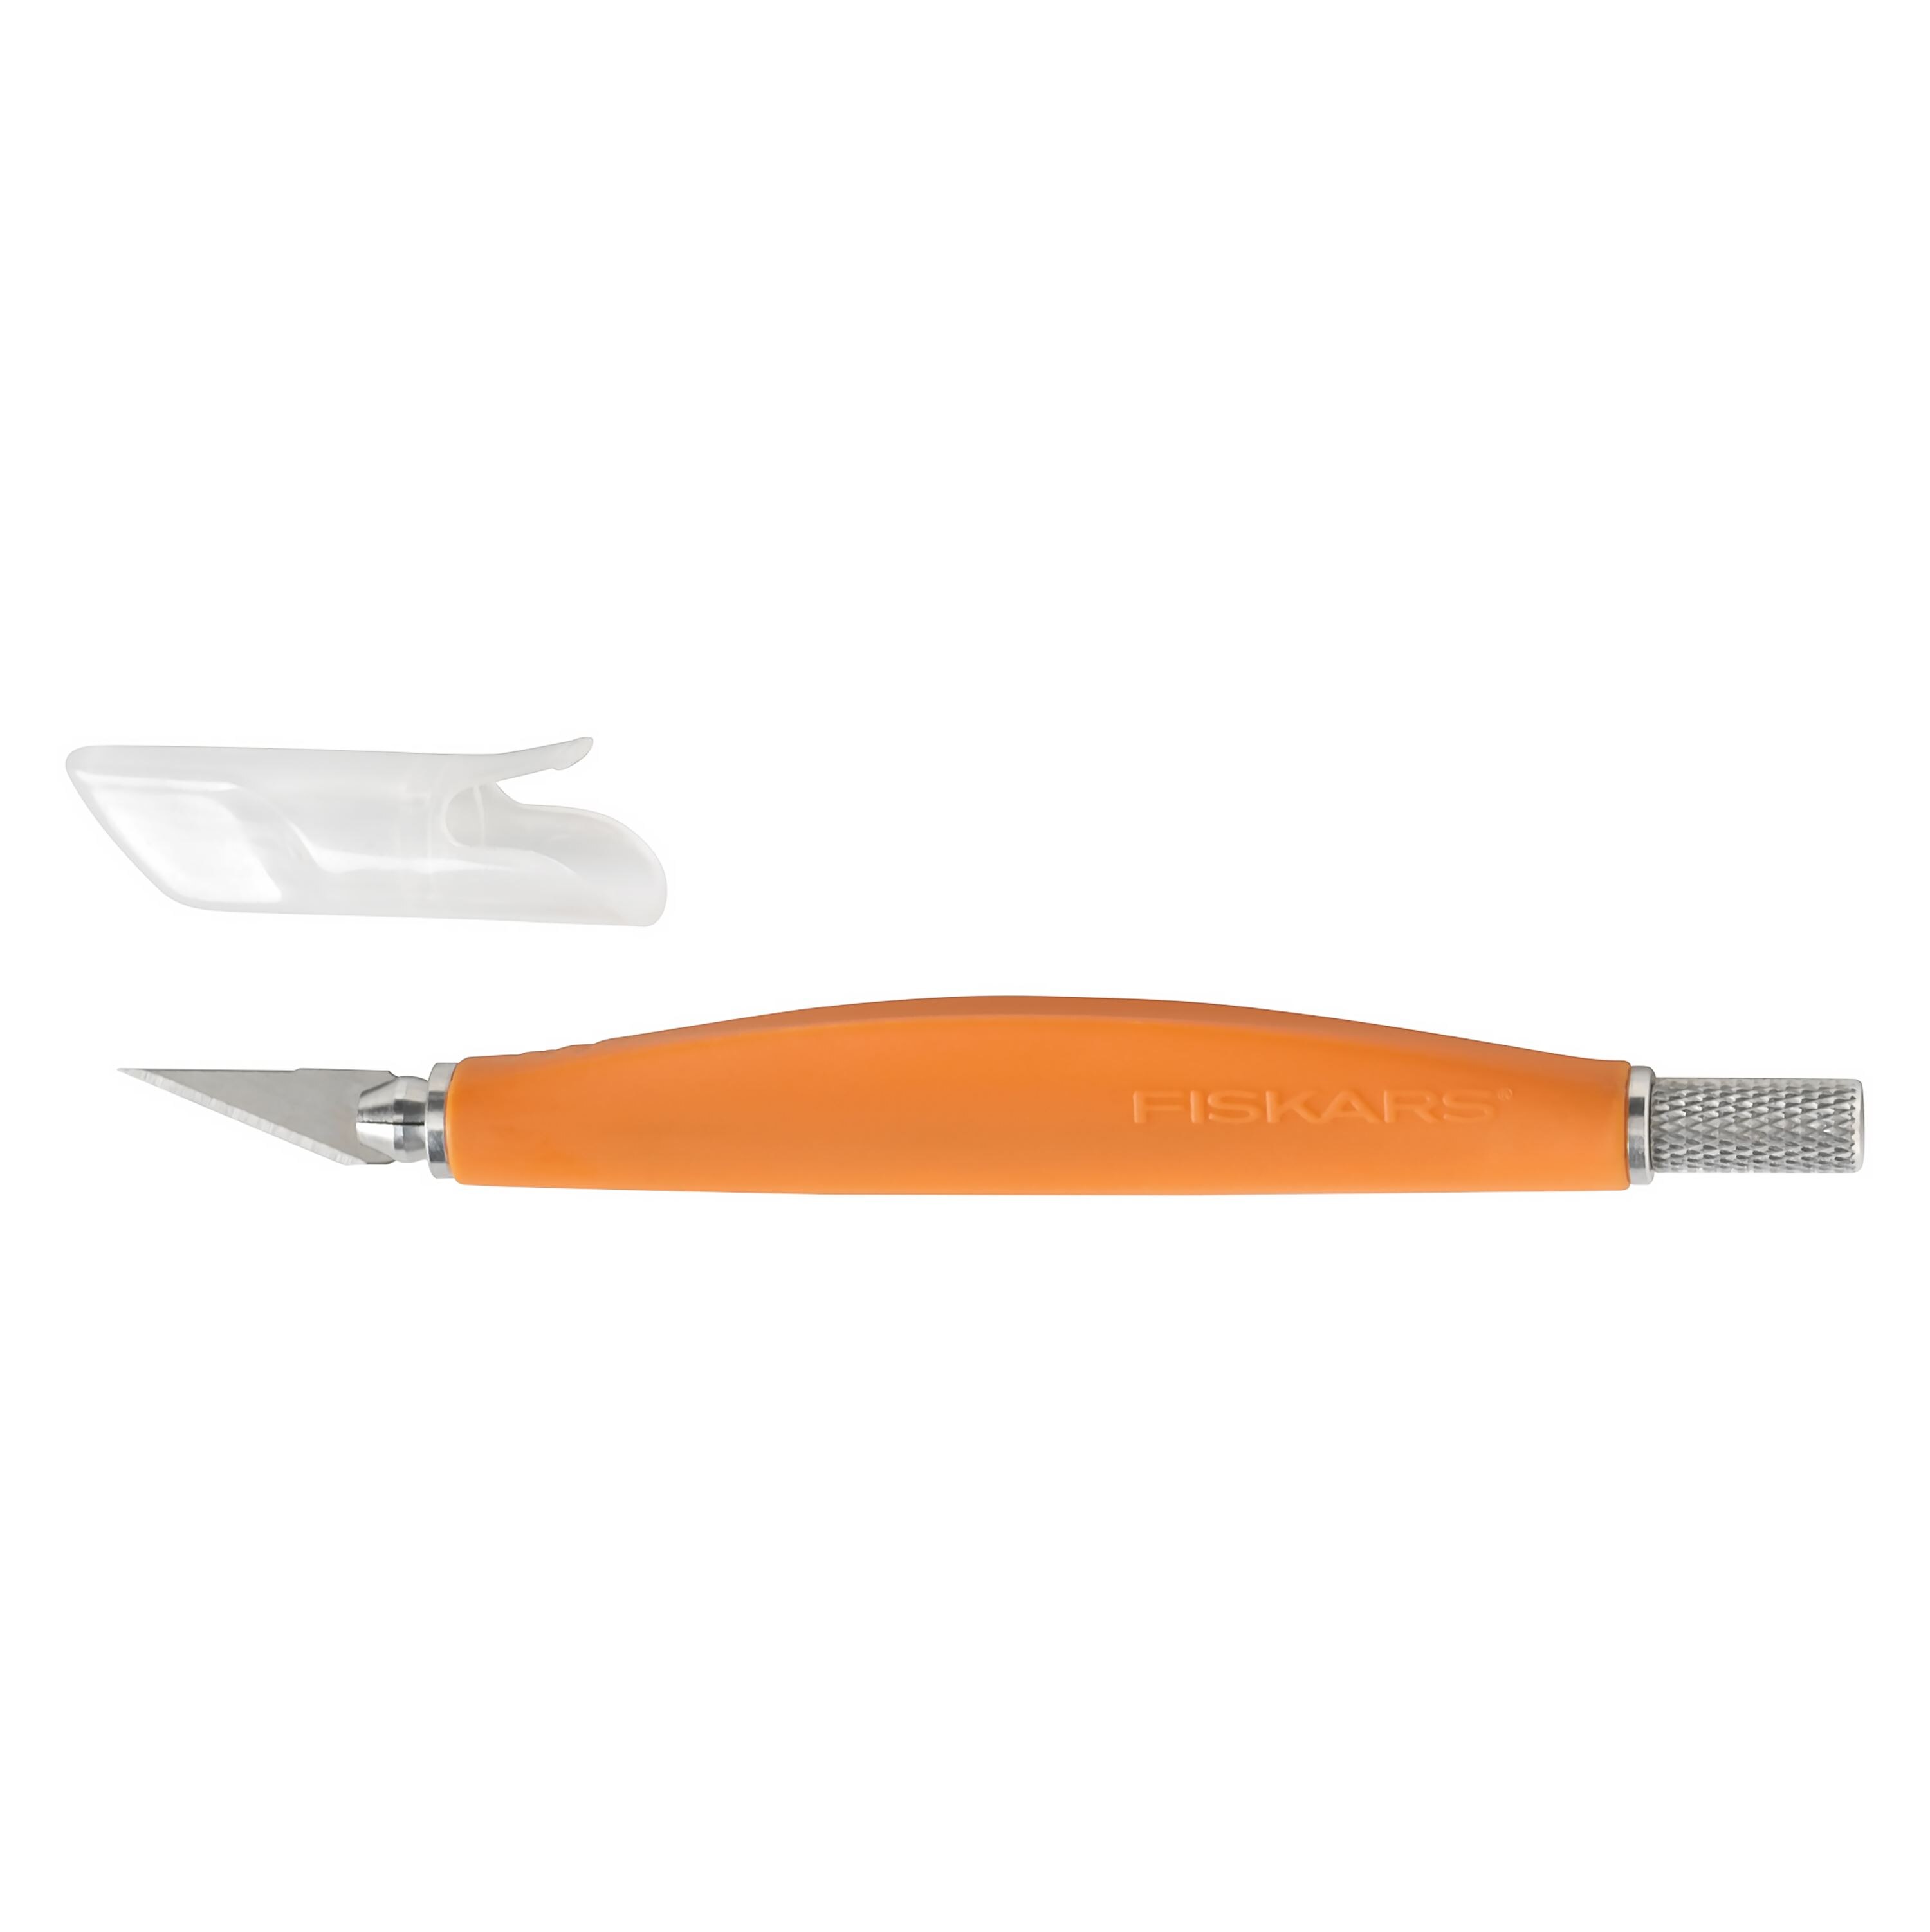 Fiskars SoftGrip Detail Craft Knife - 8 Exacto Knife for Crafting -  Multi-Use Exacto Blade Included with Protective Cover